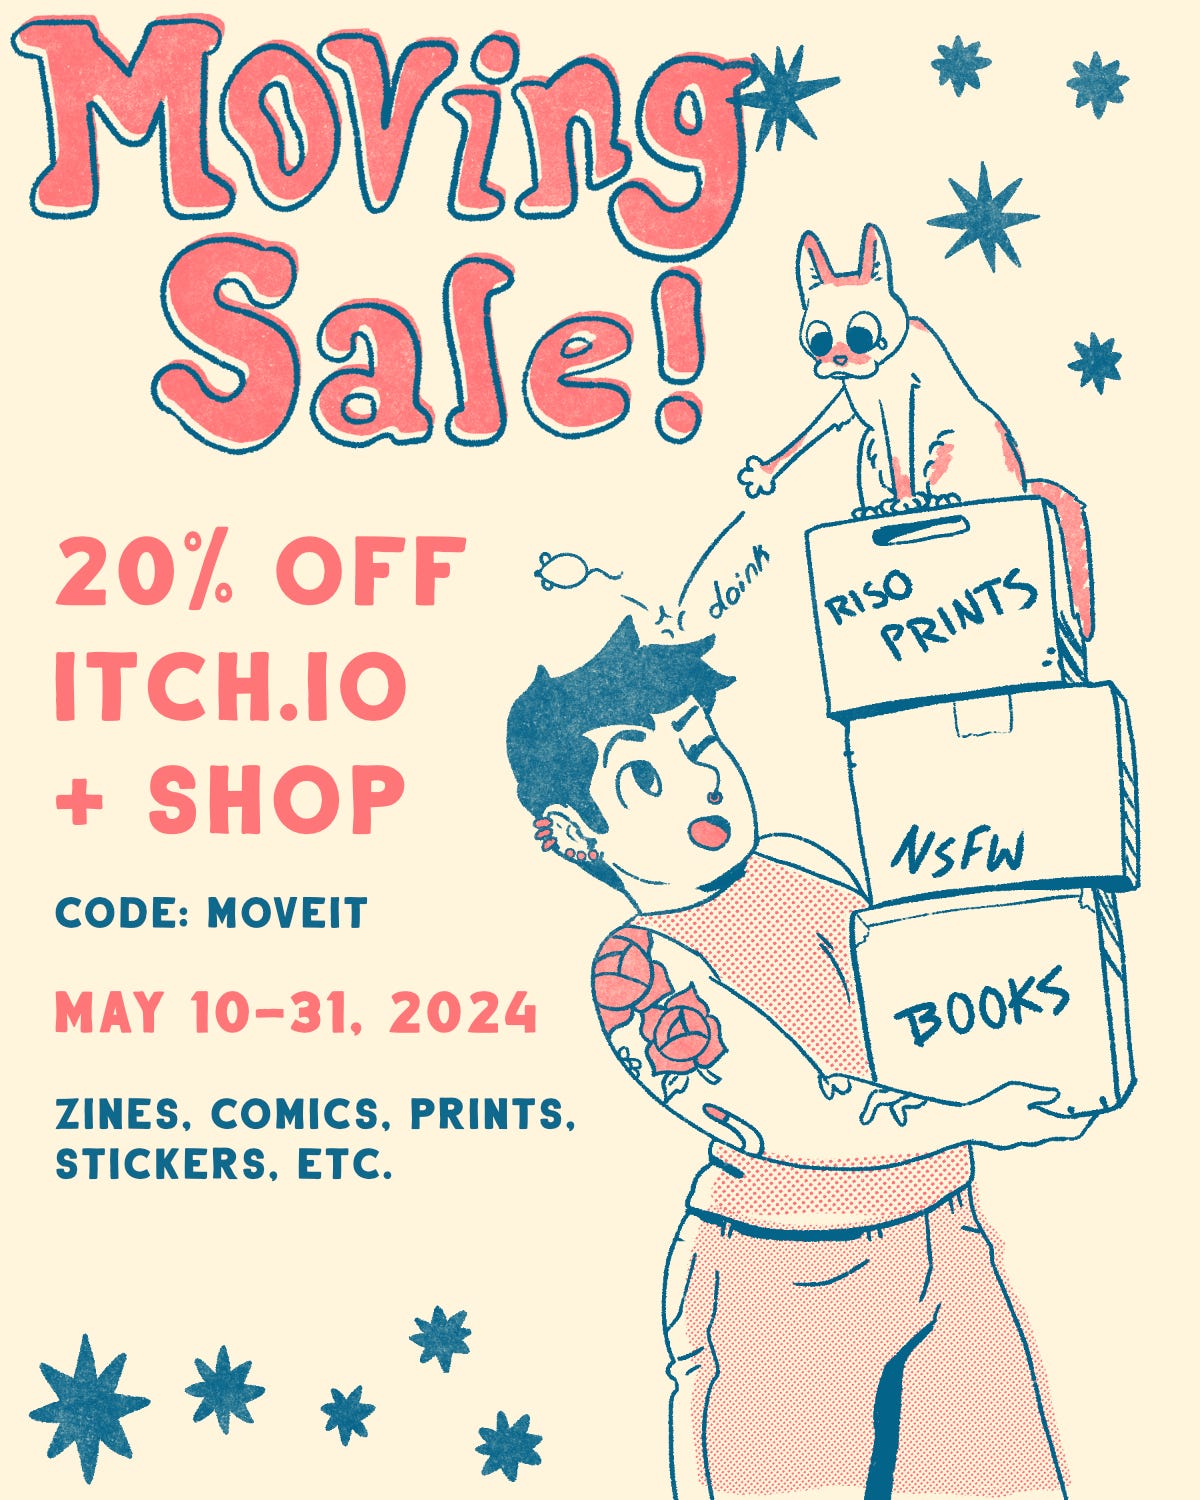 Illustration: I'm holding a huge stack of boxes while my cat pelts me with mousey toys. Text reads: moving sale! 20% off shop and itch.io. code: move it. may 10-31, 2024. zines, comics, prints, stickers, etc.